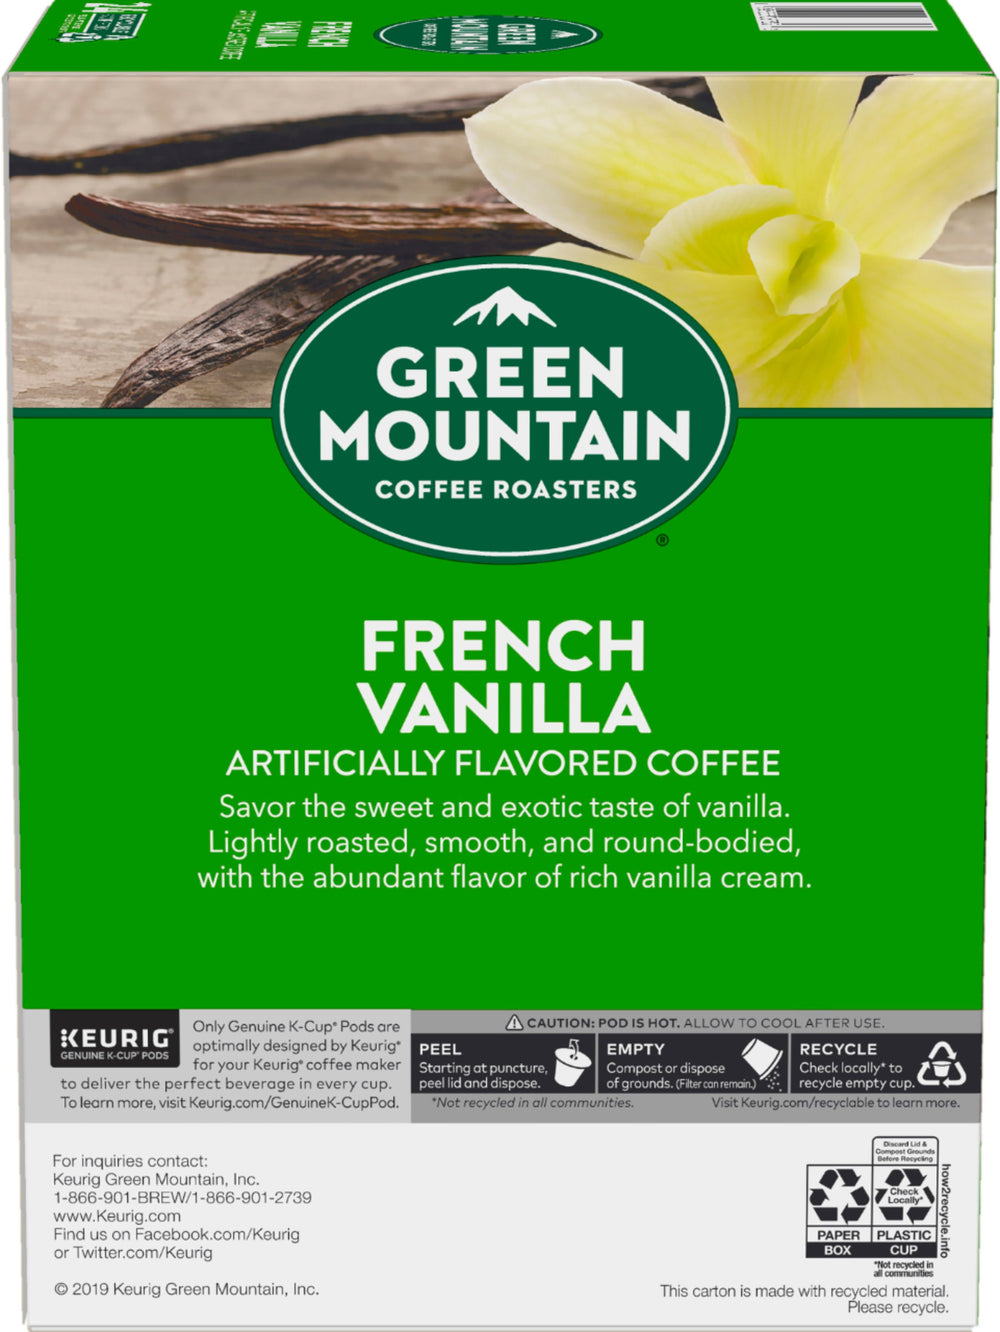 Green Mountain Coffee - French Vanilla Coffee, Keurig Single-Serve K-Cup pods, Light Roast, 24 Count_1